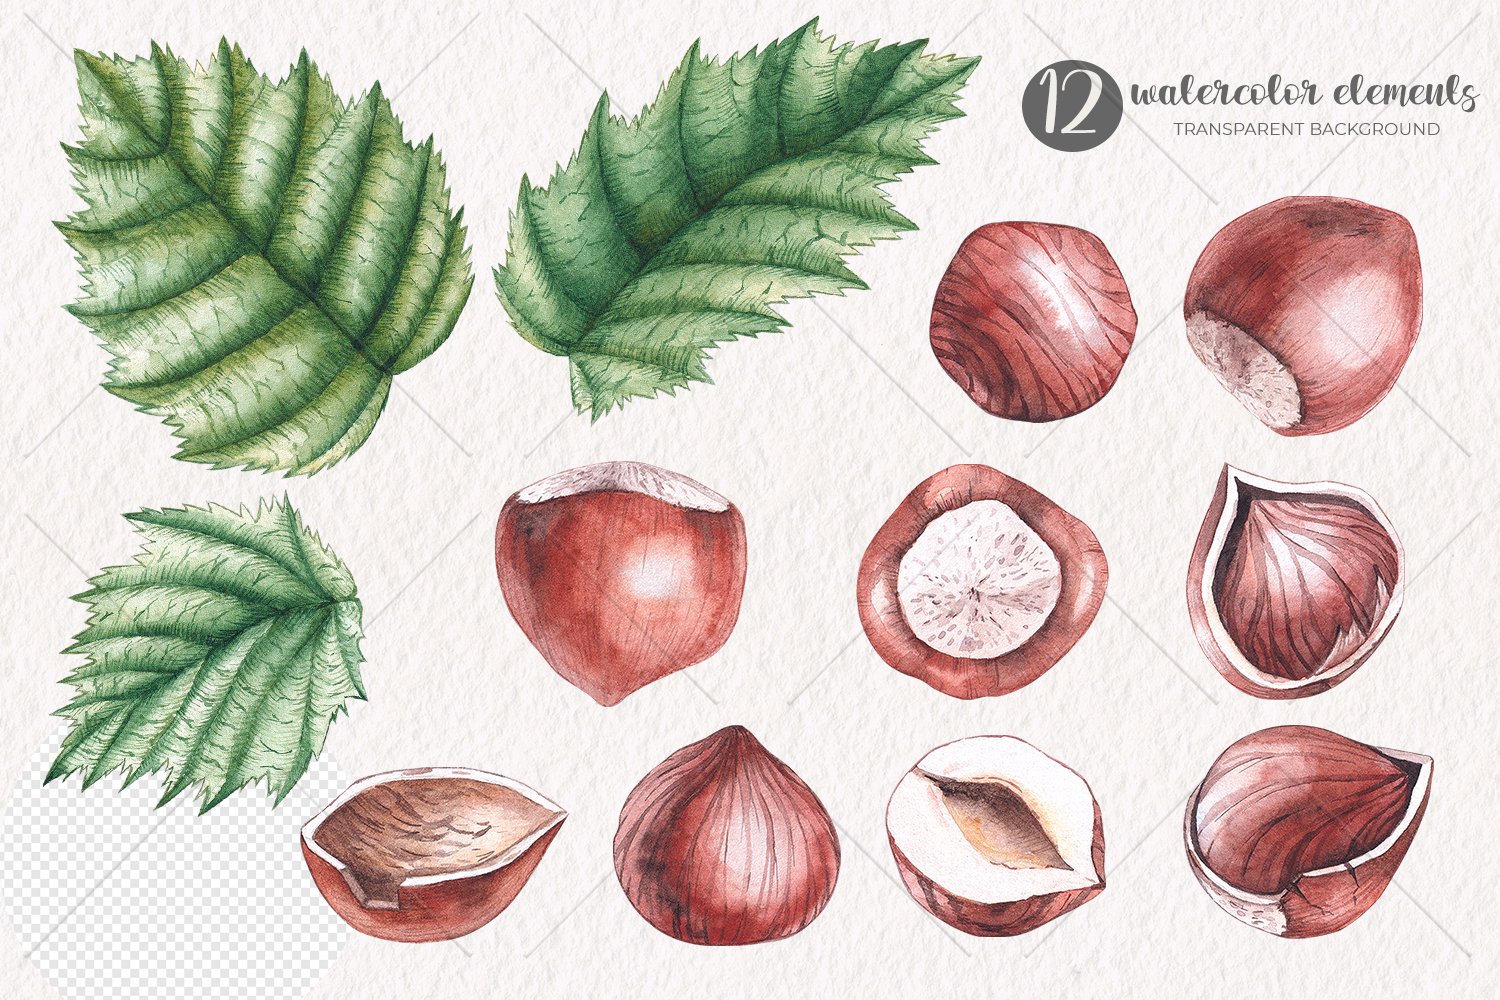 Lettering "12 Watercolor Elements" and a set of 9 different hazelnuts and 3 leaves on a gray background.